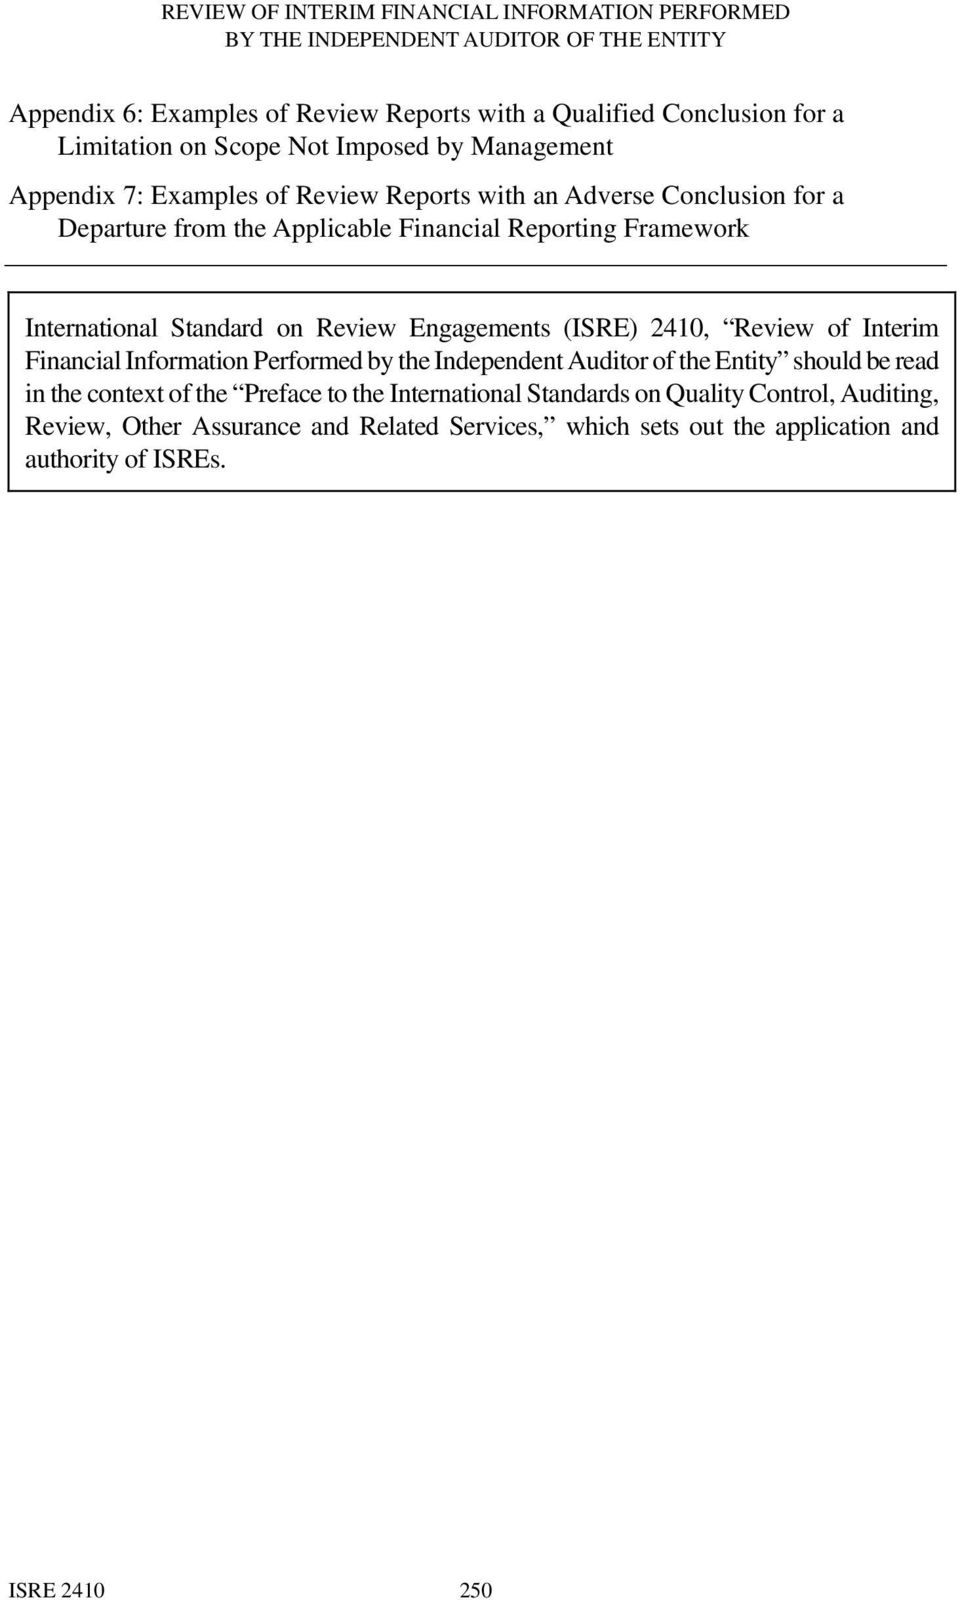 2410, Review of Interim Financial Information Performed by the Independent Auditor of the Entity should be read in the context of the Preface to the